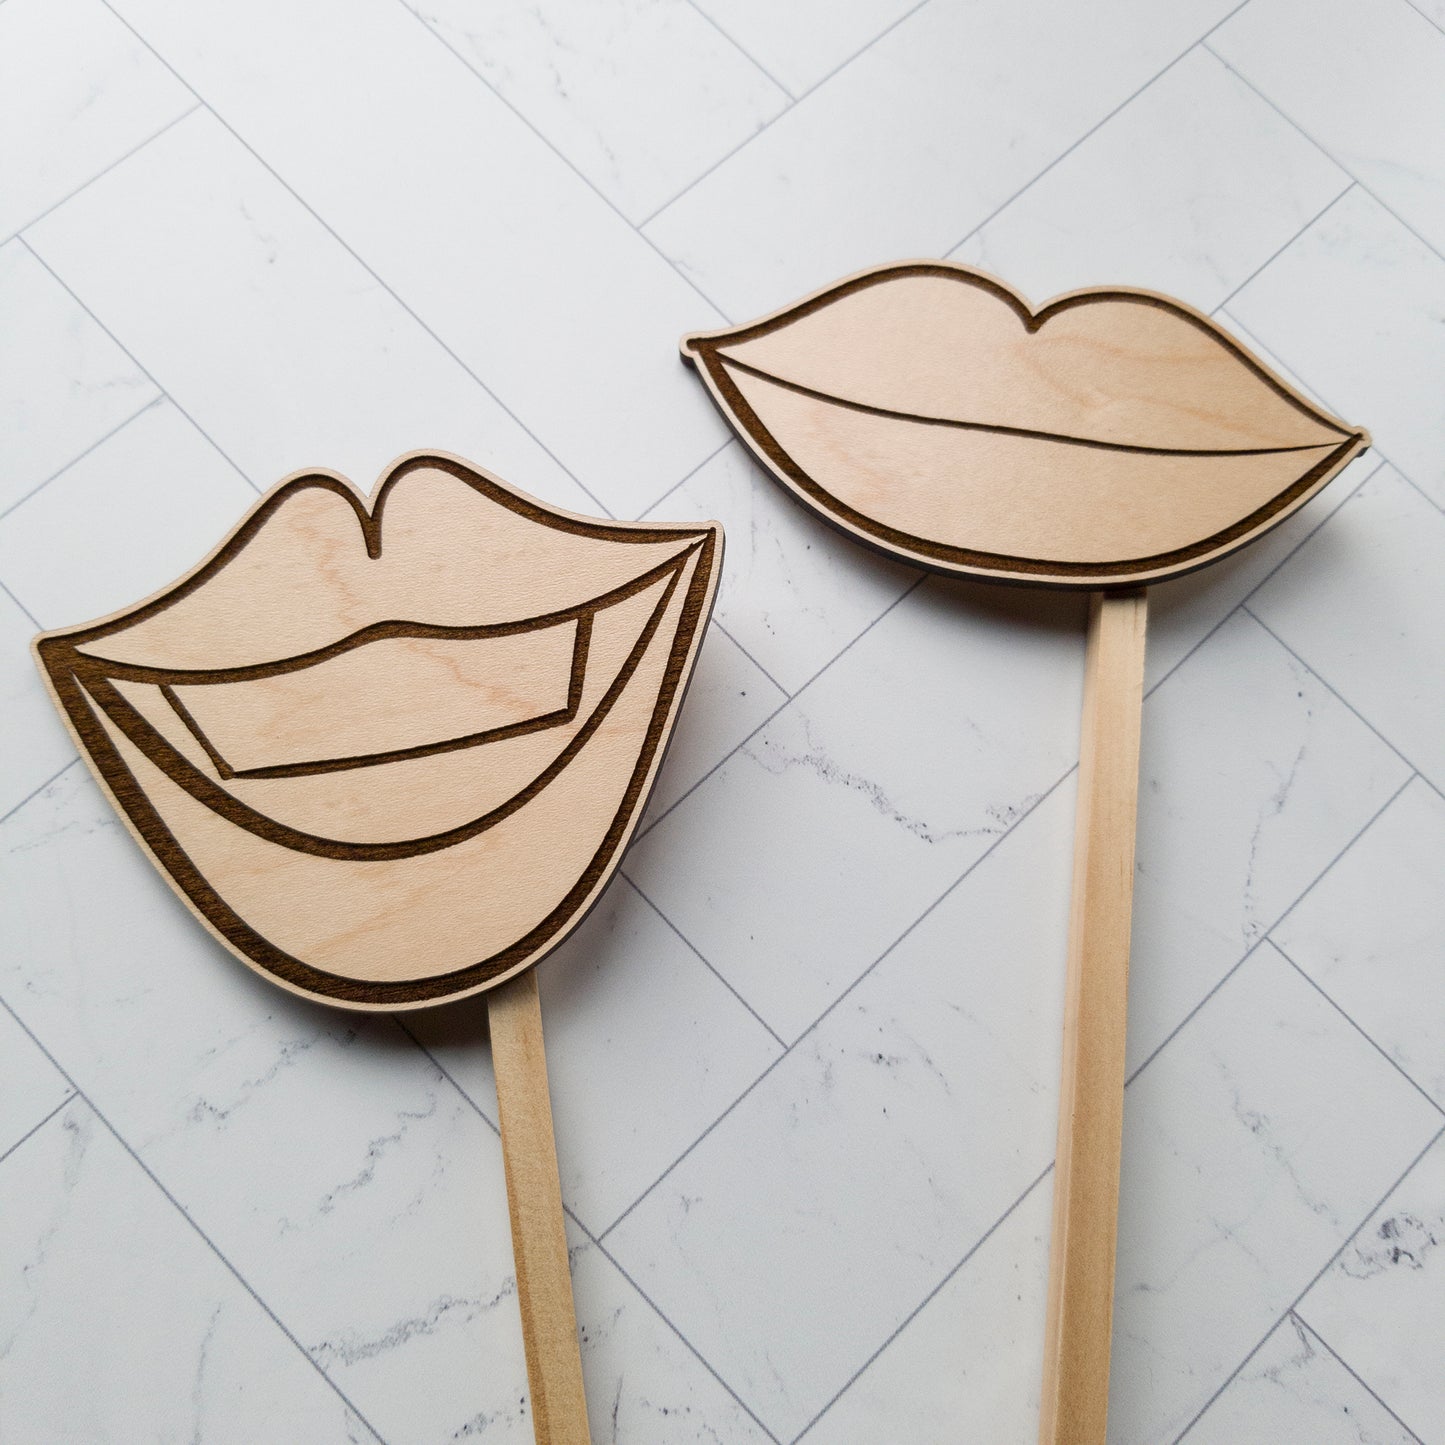 Comical Lips Photobooth Props (Set of 2)